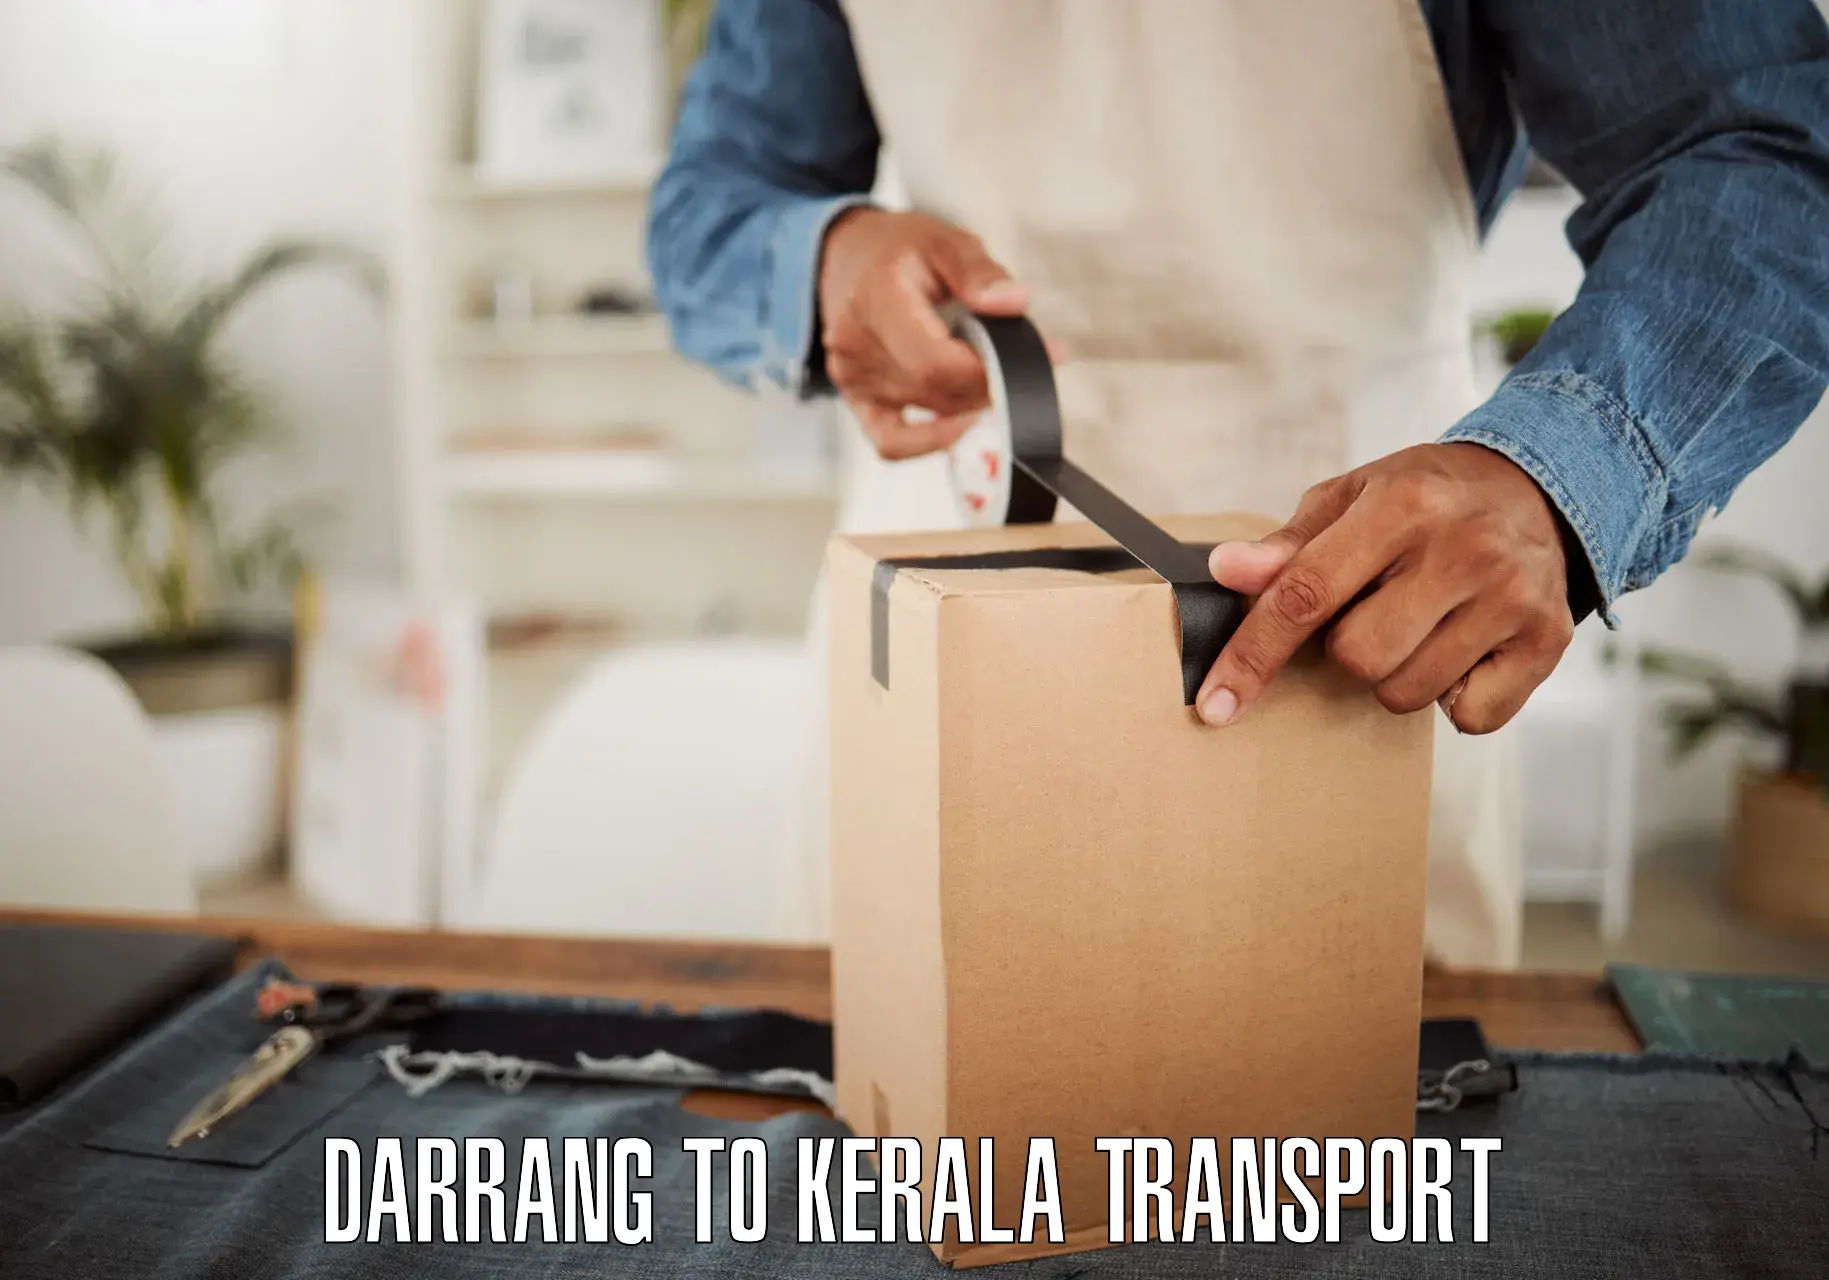 Truck transport companies in India Darrang to Kumily